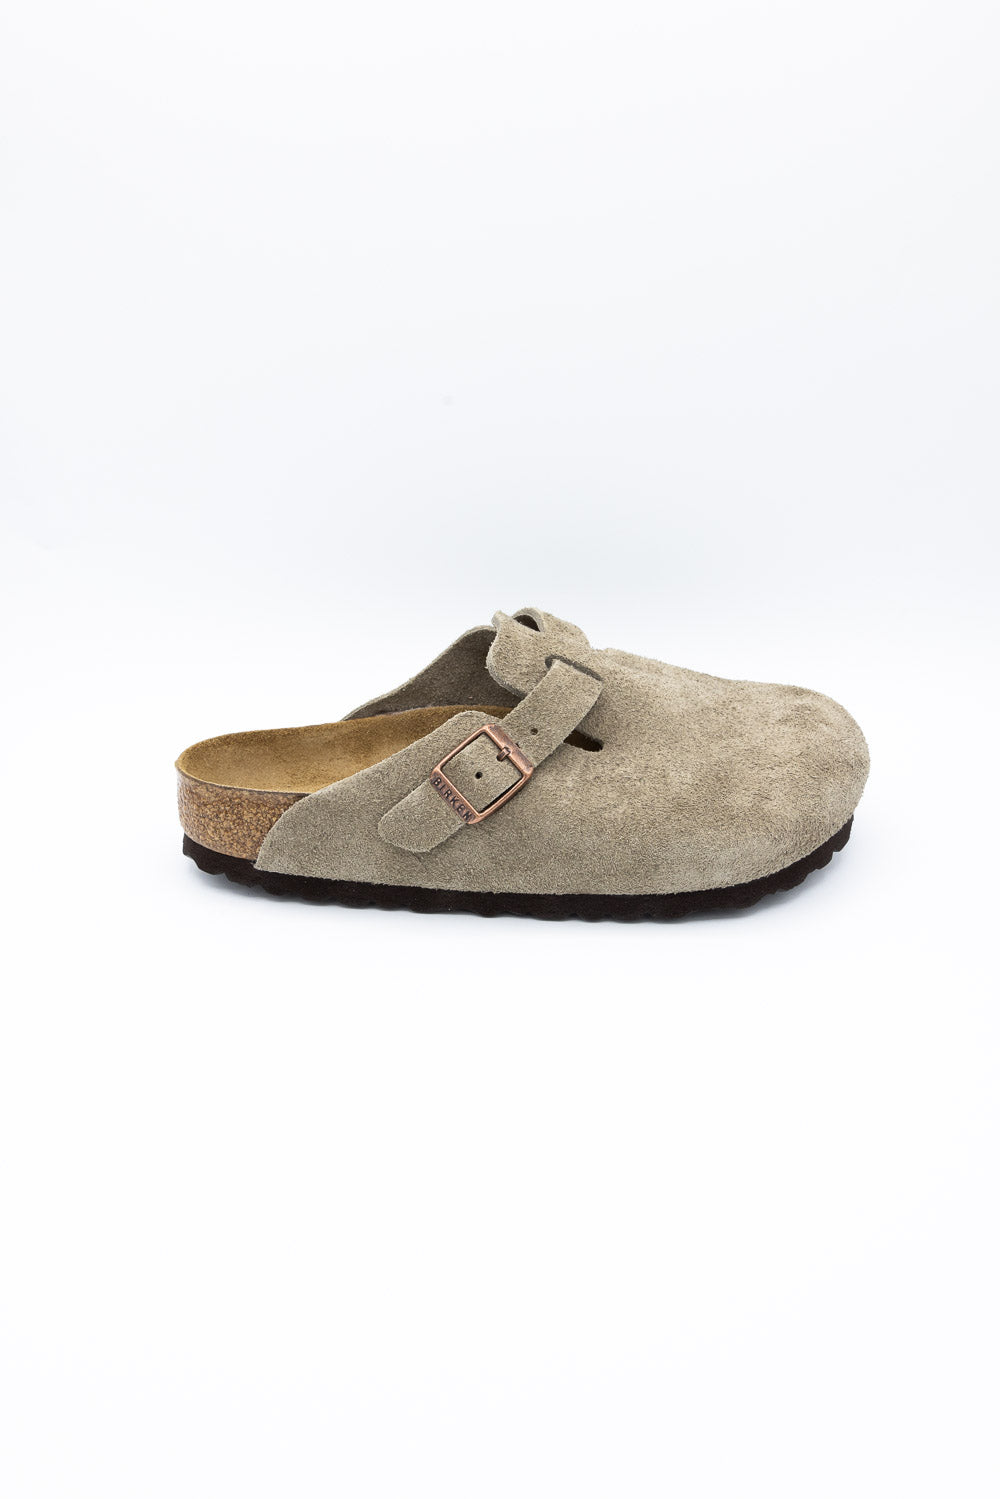 Birkenstock Soft Footbed Clogs for Women in Taupe | 560771-W